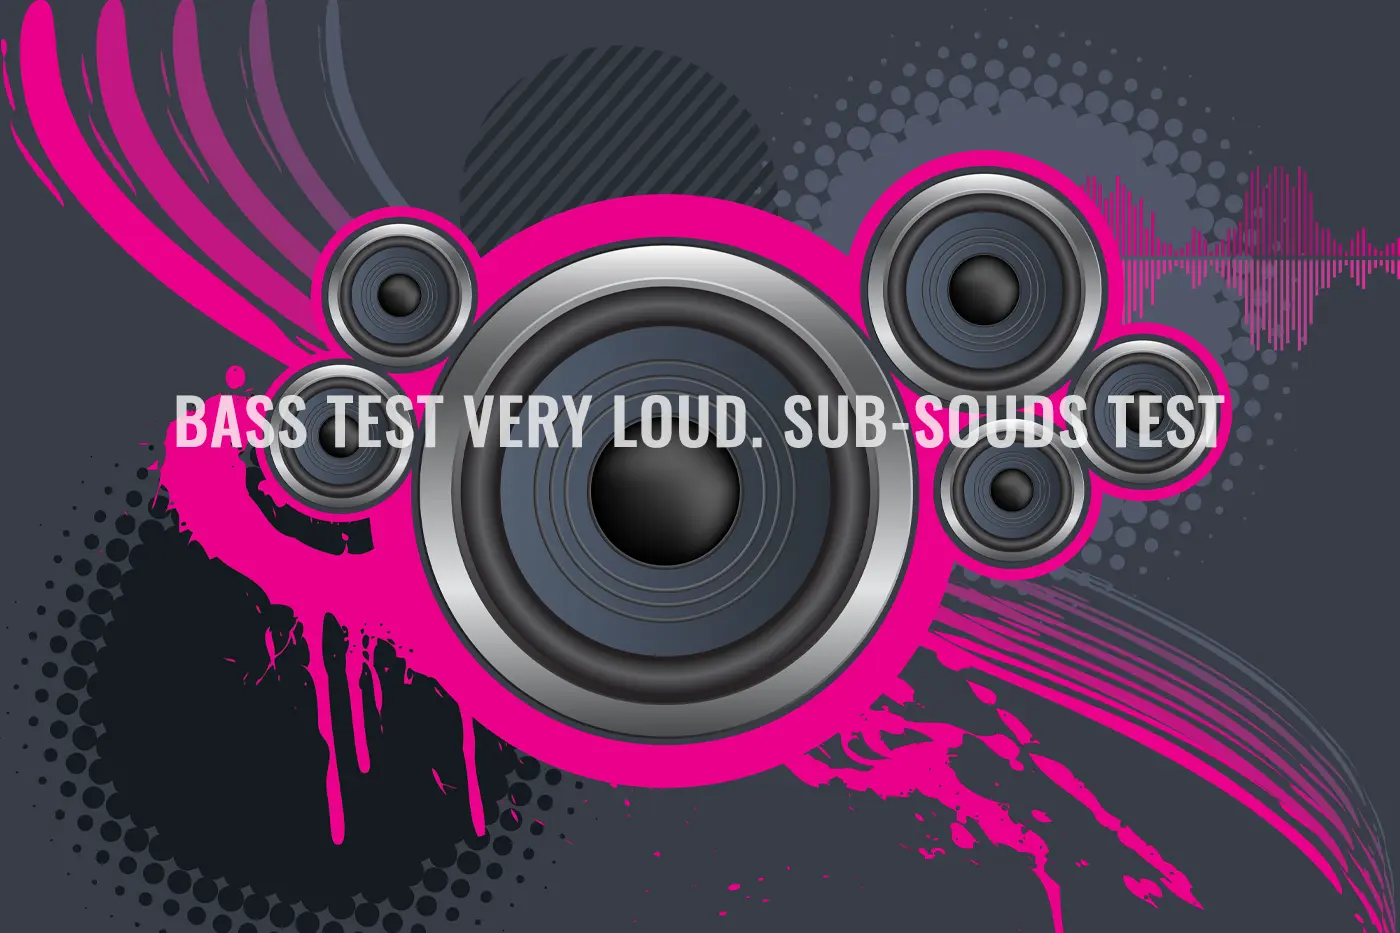 Bass Test Very Loud. Sub-Souds Test